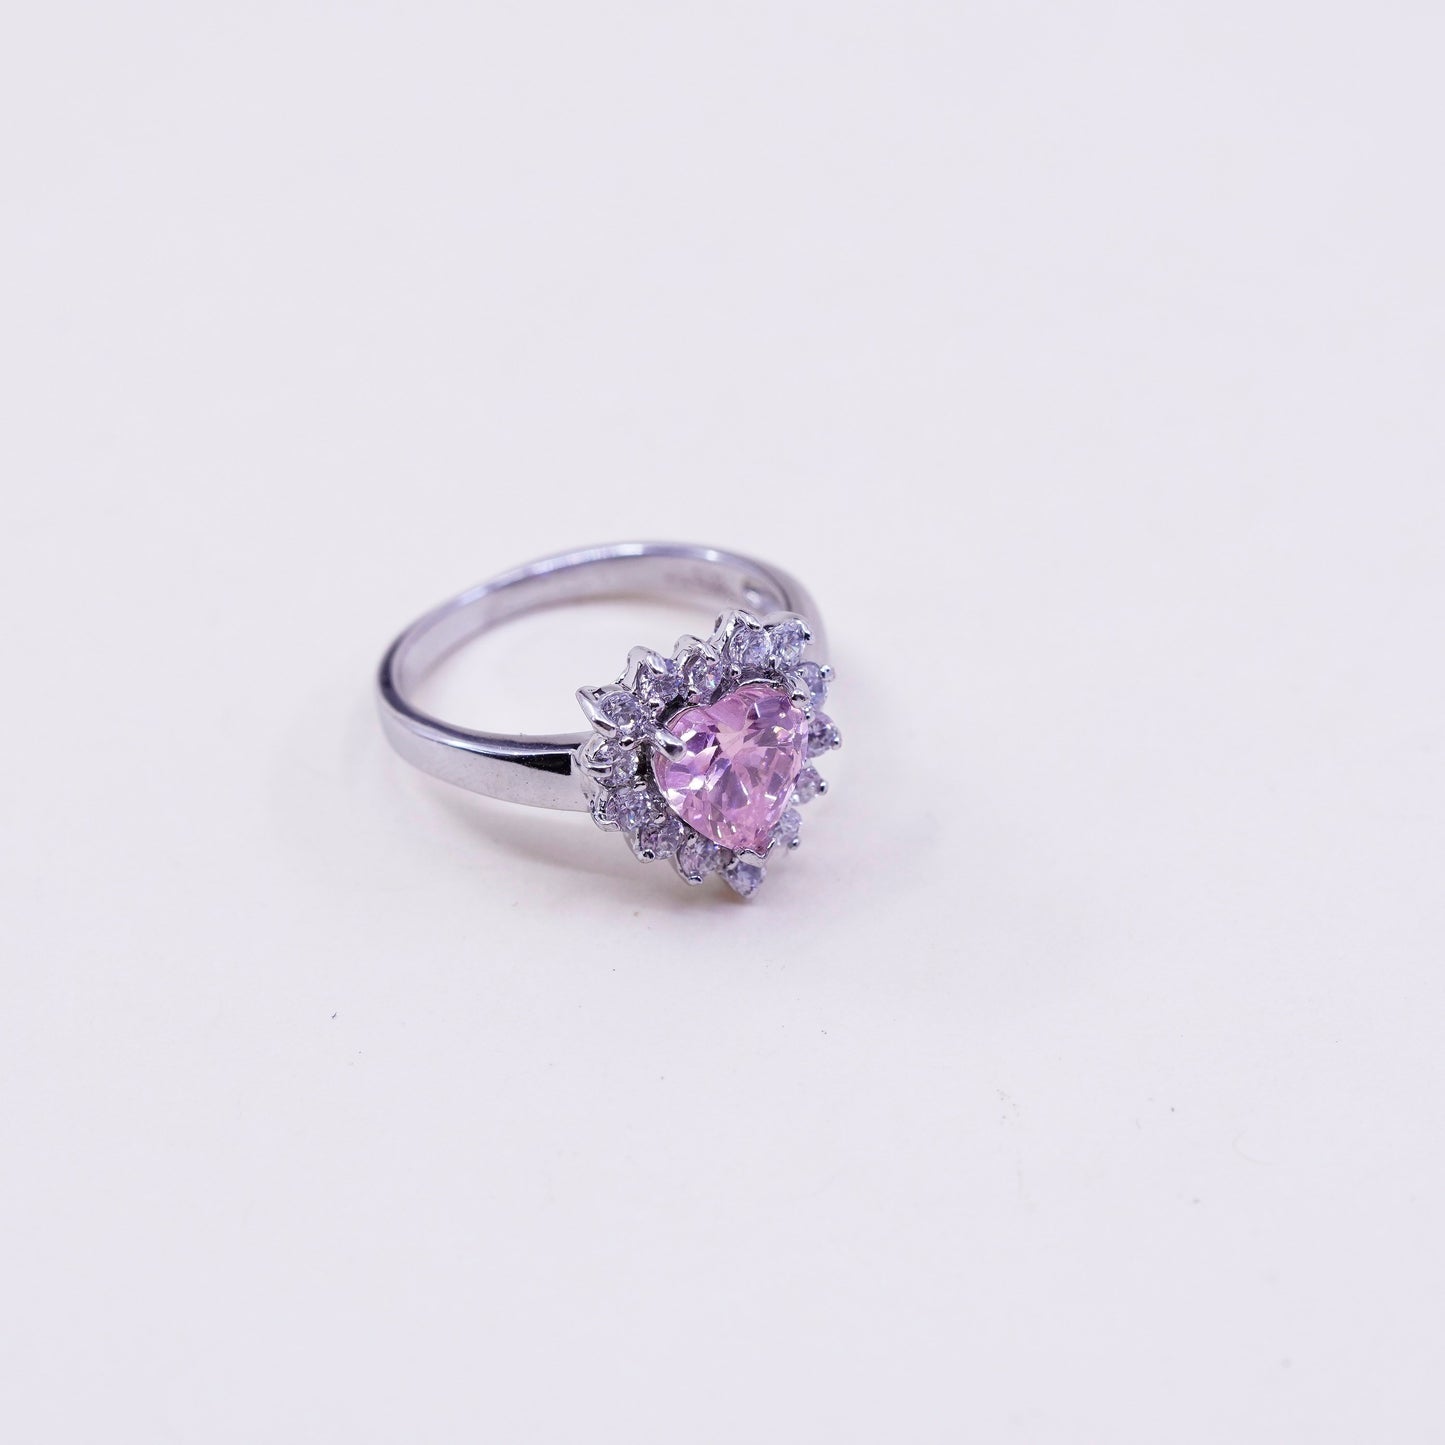 Size 6.25, 2.8g, vintage 12K white gold engagement pink heart ring with Cz